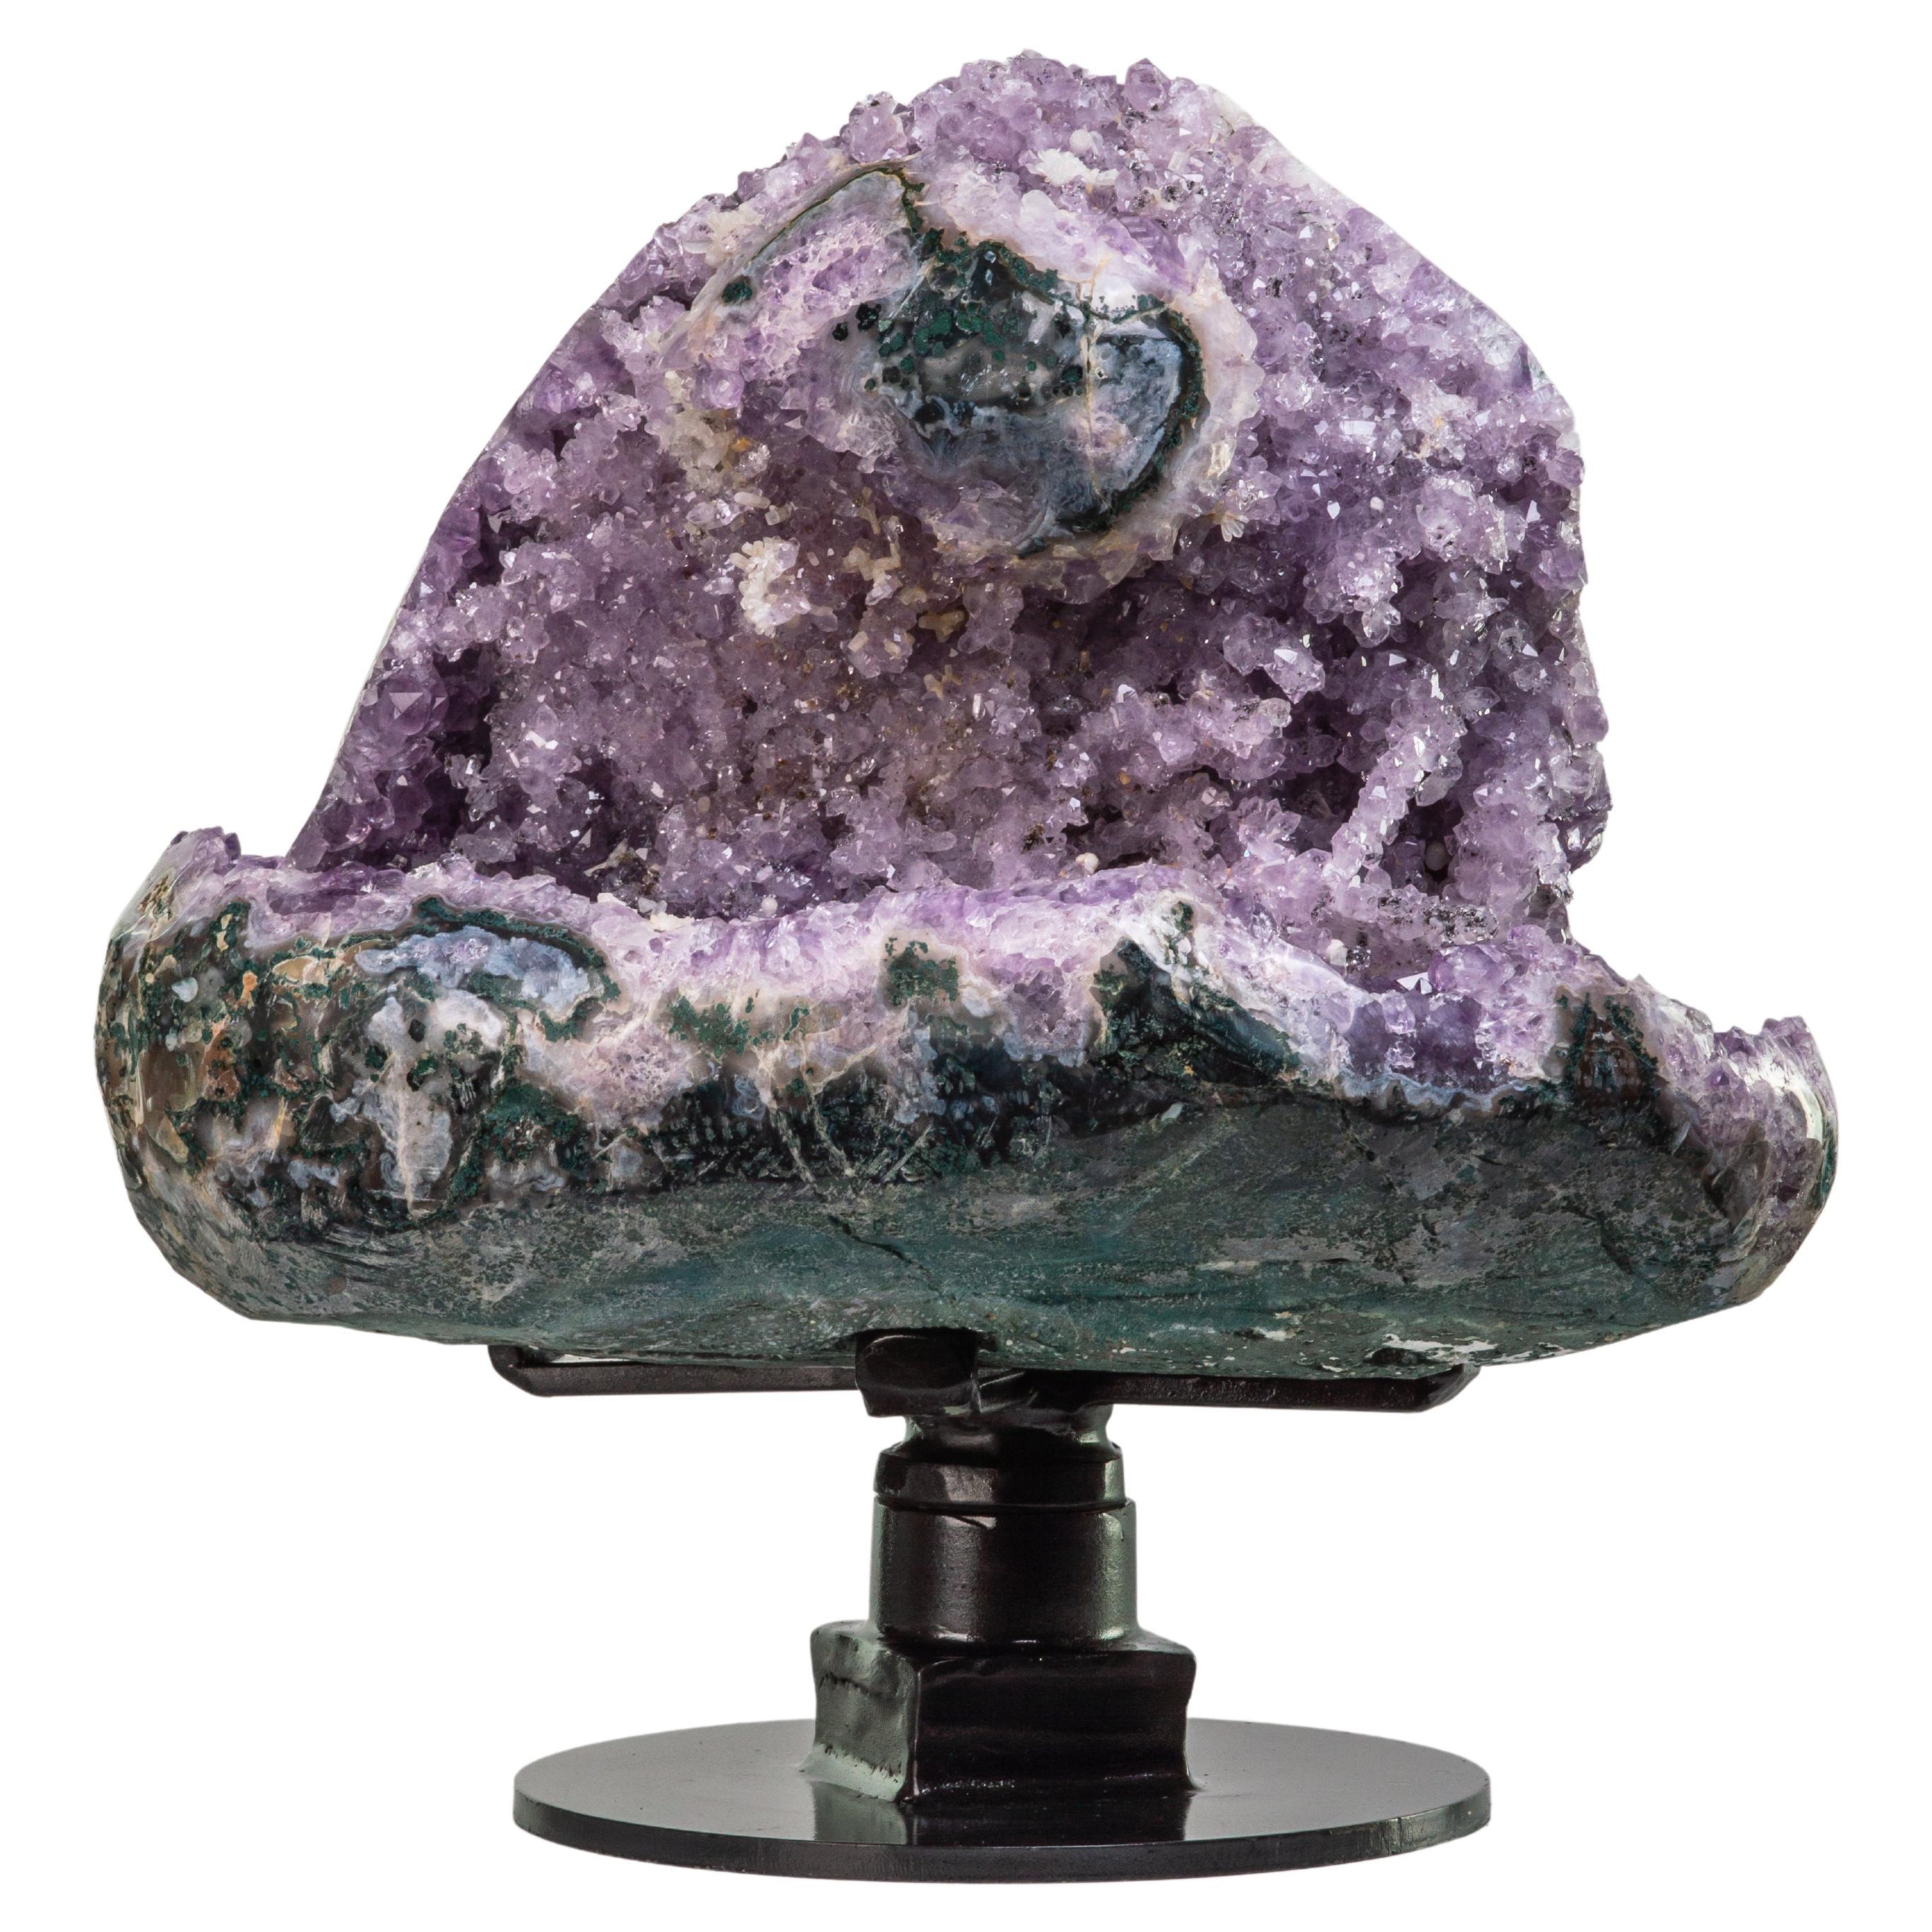 From the “heart” of a large geode, this specimen shows various crystal
formations of note. The multi-windowed piece shows amethyst in typical
peaked form as well as stellate white quartz formations and orange druze
from the other side. The piece